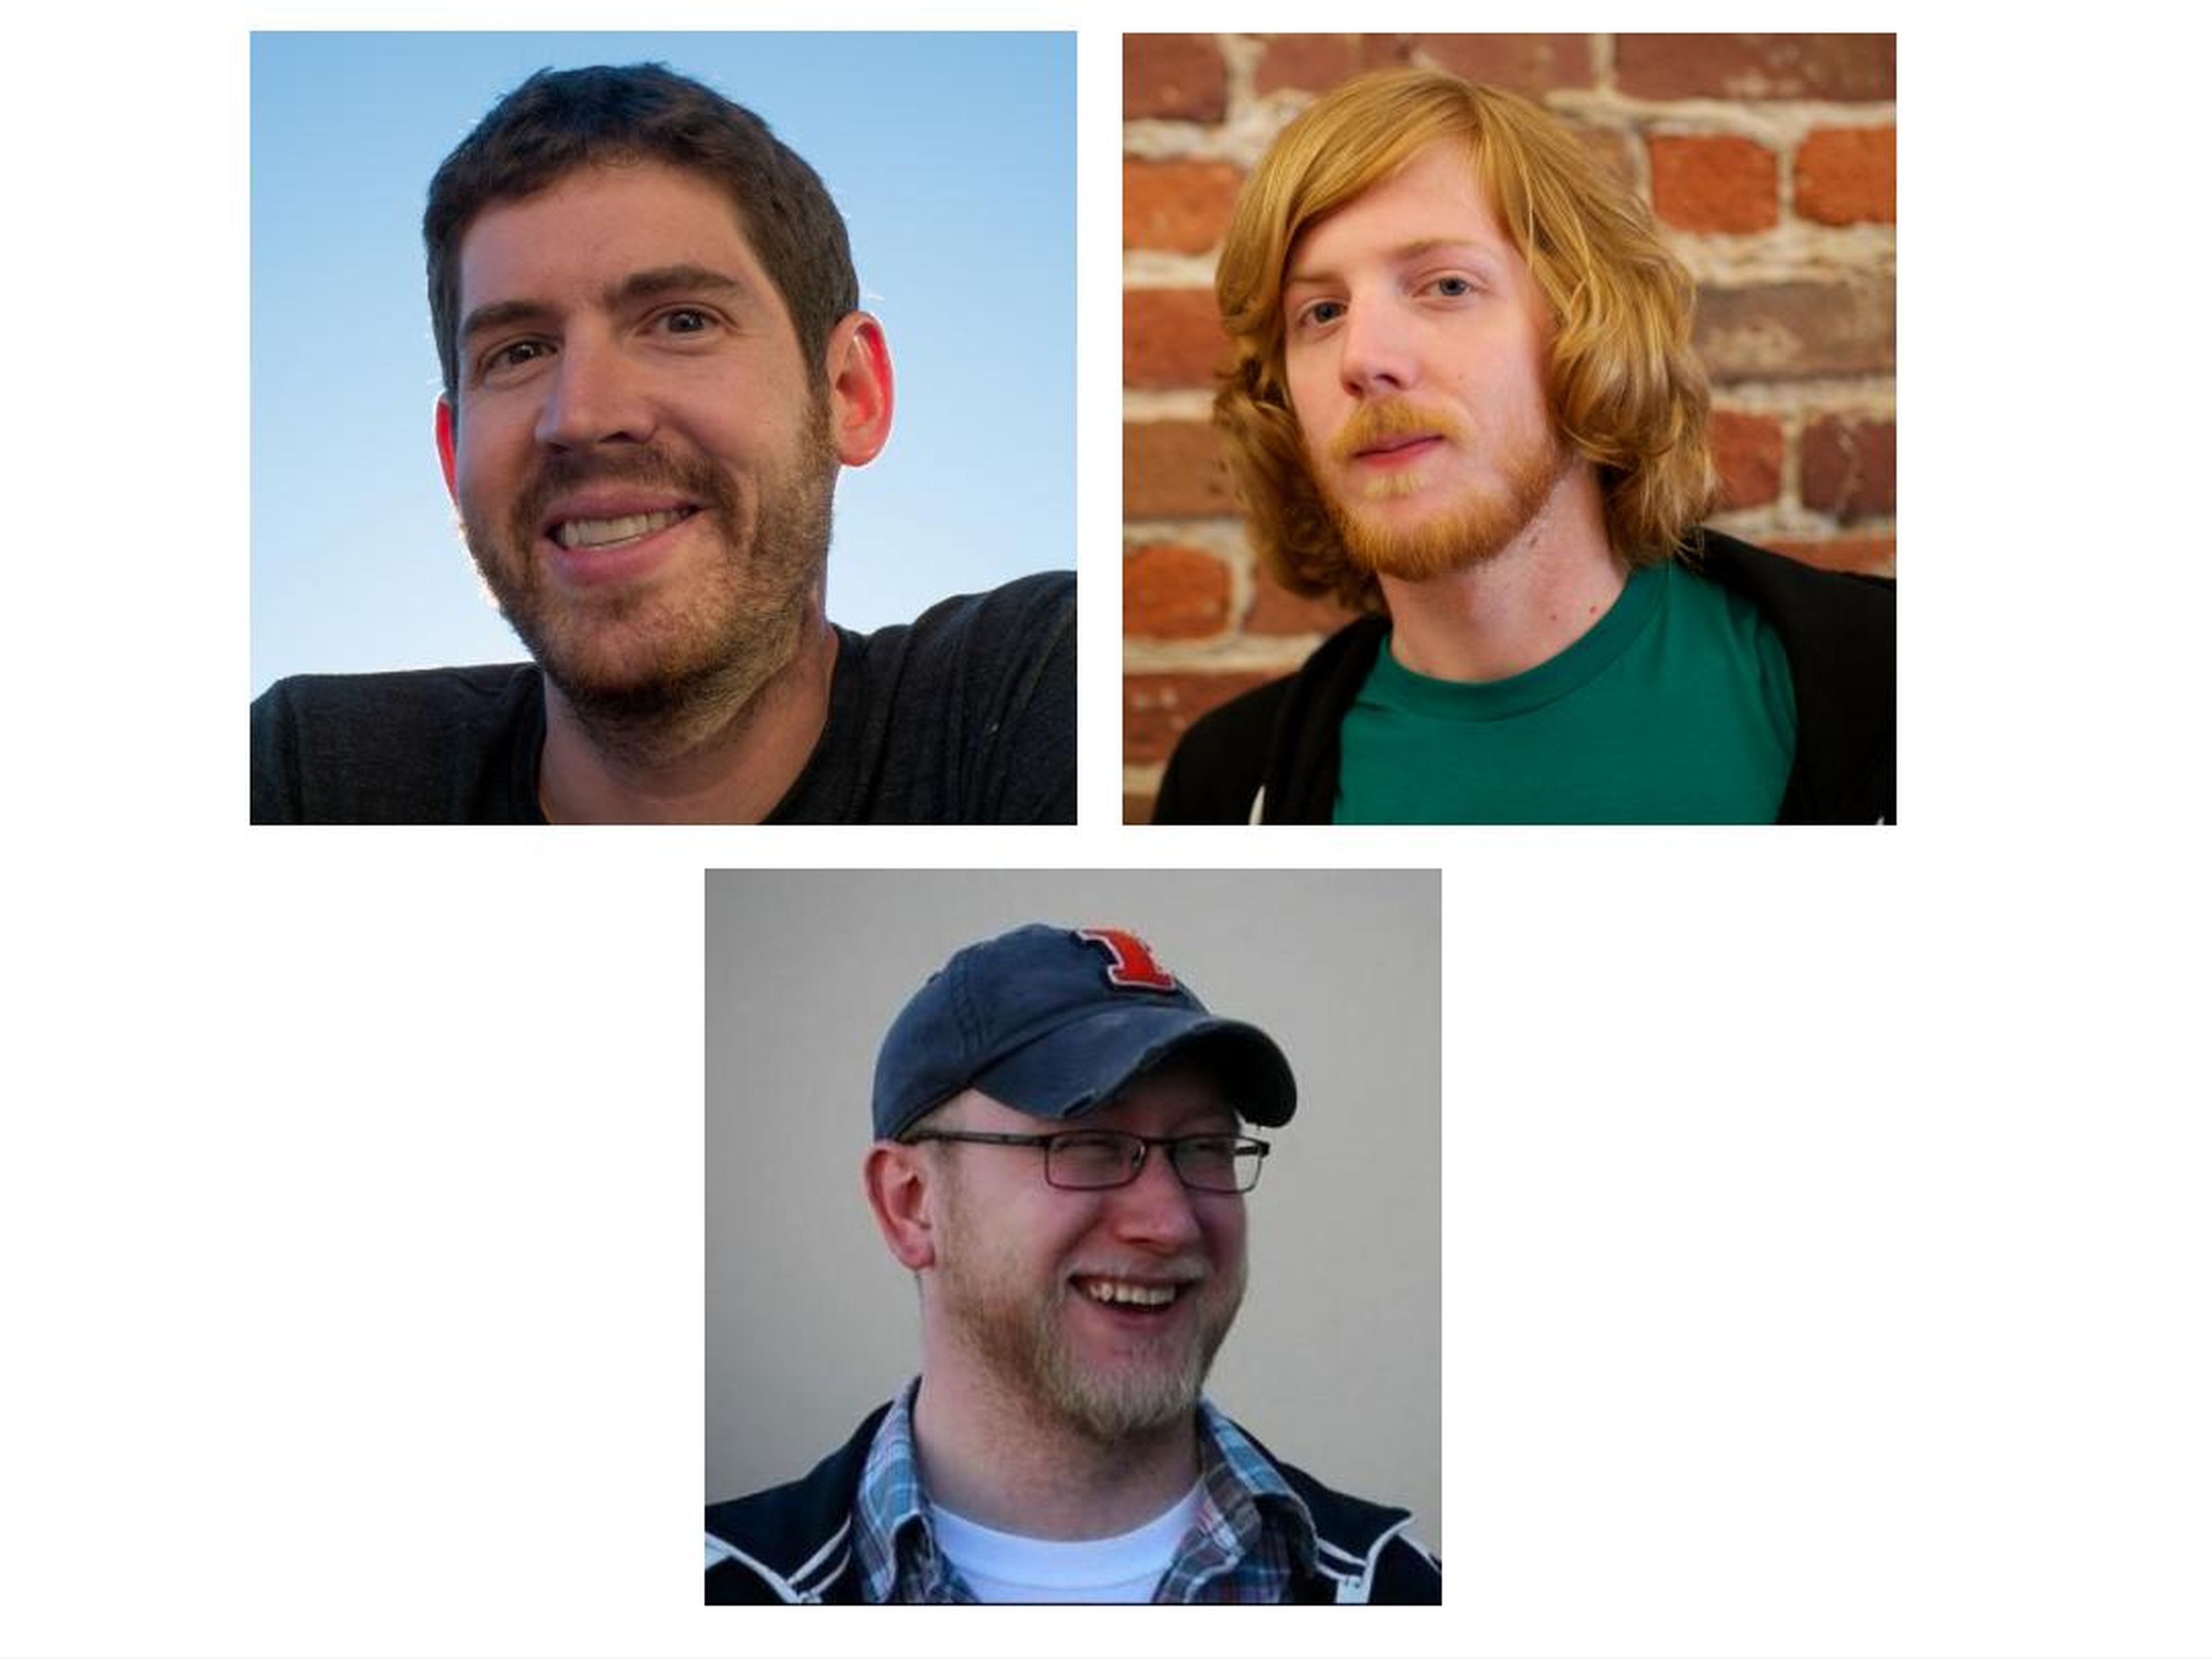 Tom Preston-Werner, Chris Wanstrath, and PJ Hyett are the co-founders of GitHub, which was acquired by Microsoft in June.